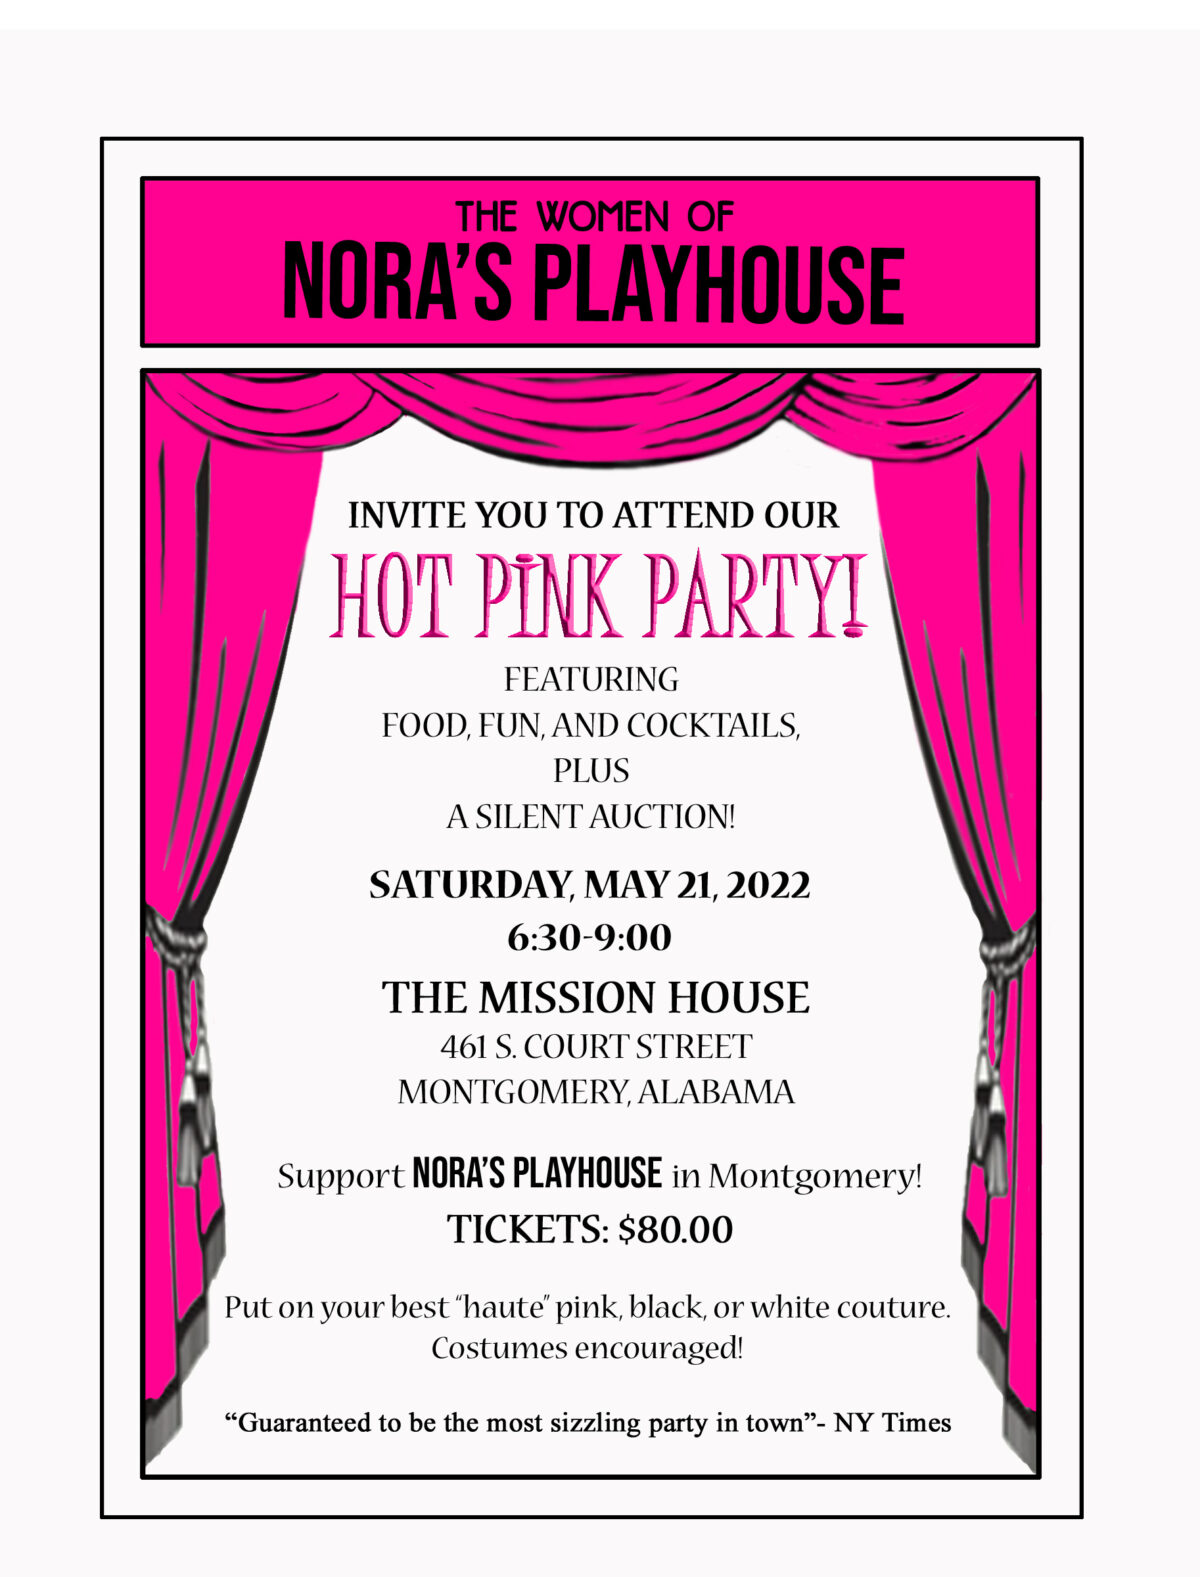 drawing of hot pink stage curtains on a white background with text in black and hot pink inviting people to Nora's Playhouse's Hot Pink Party on 5/21 in Montgomery AL